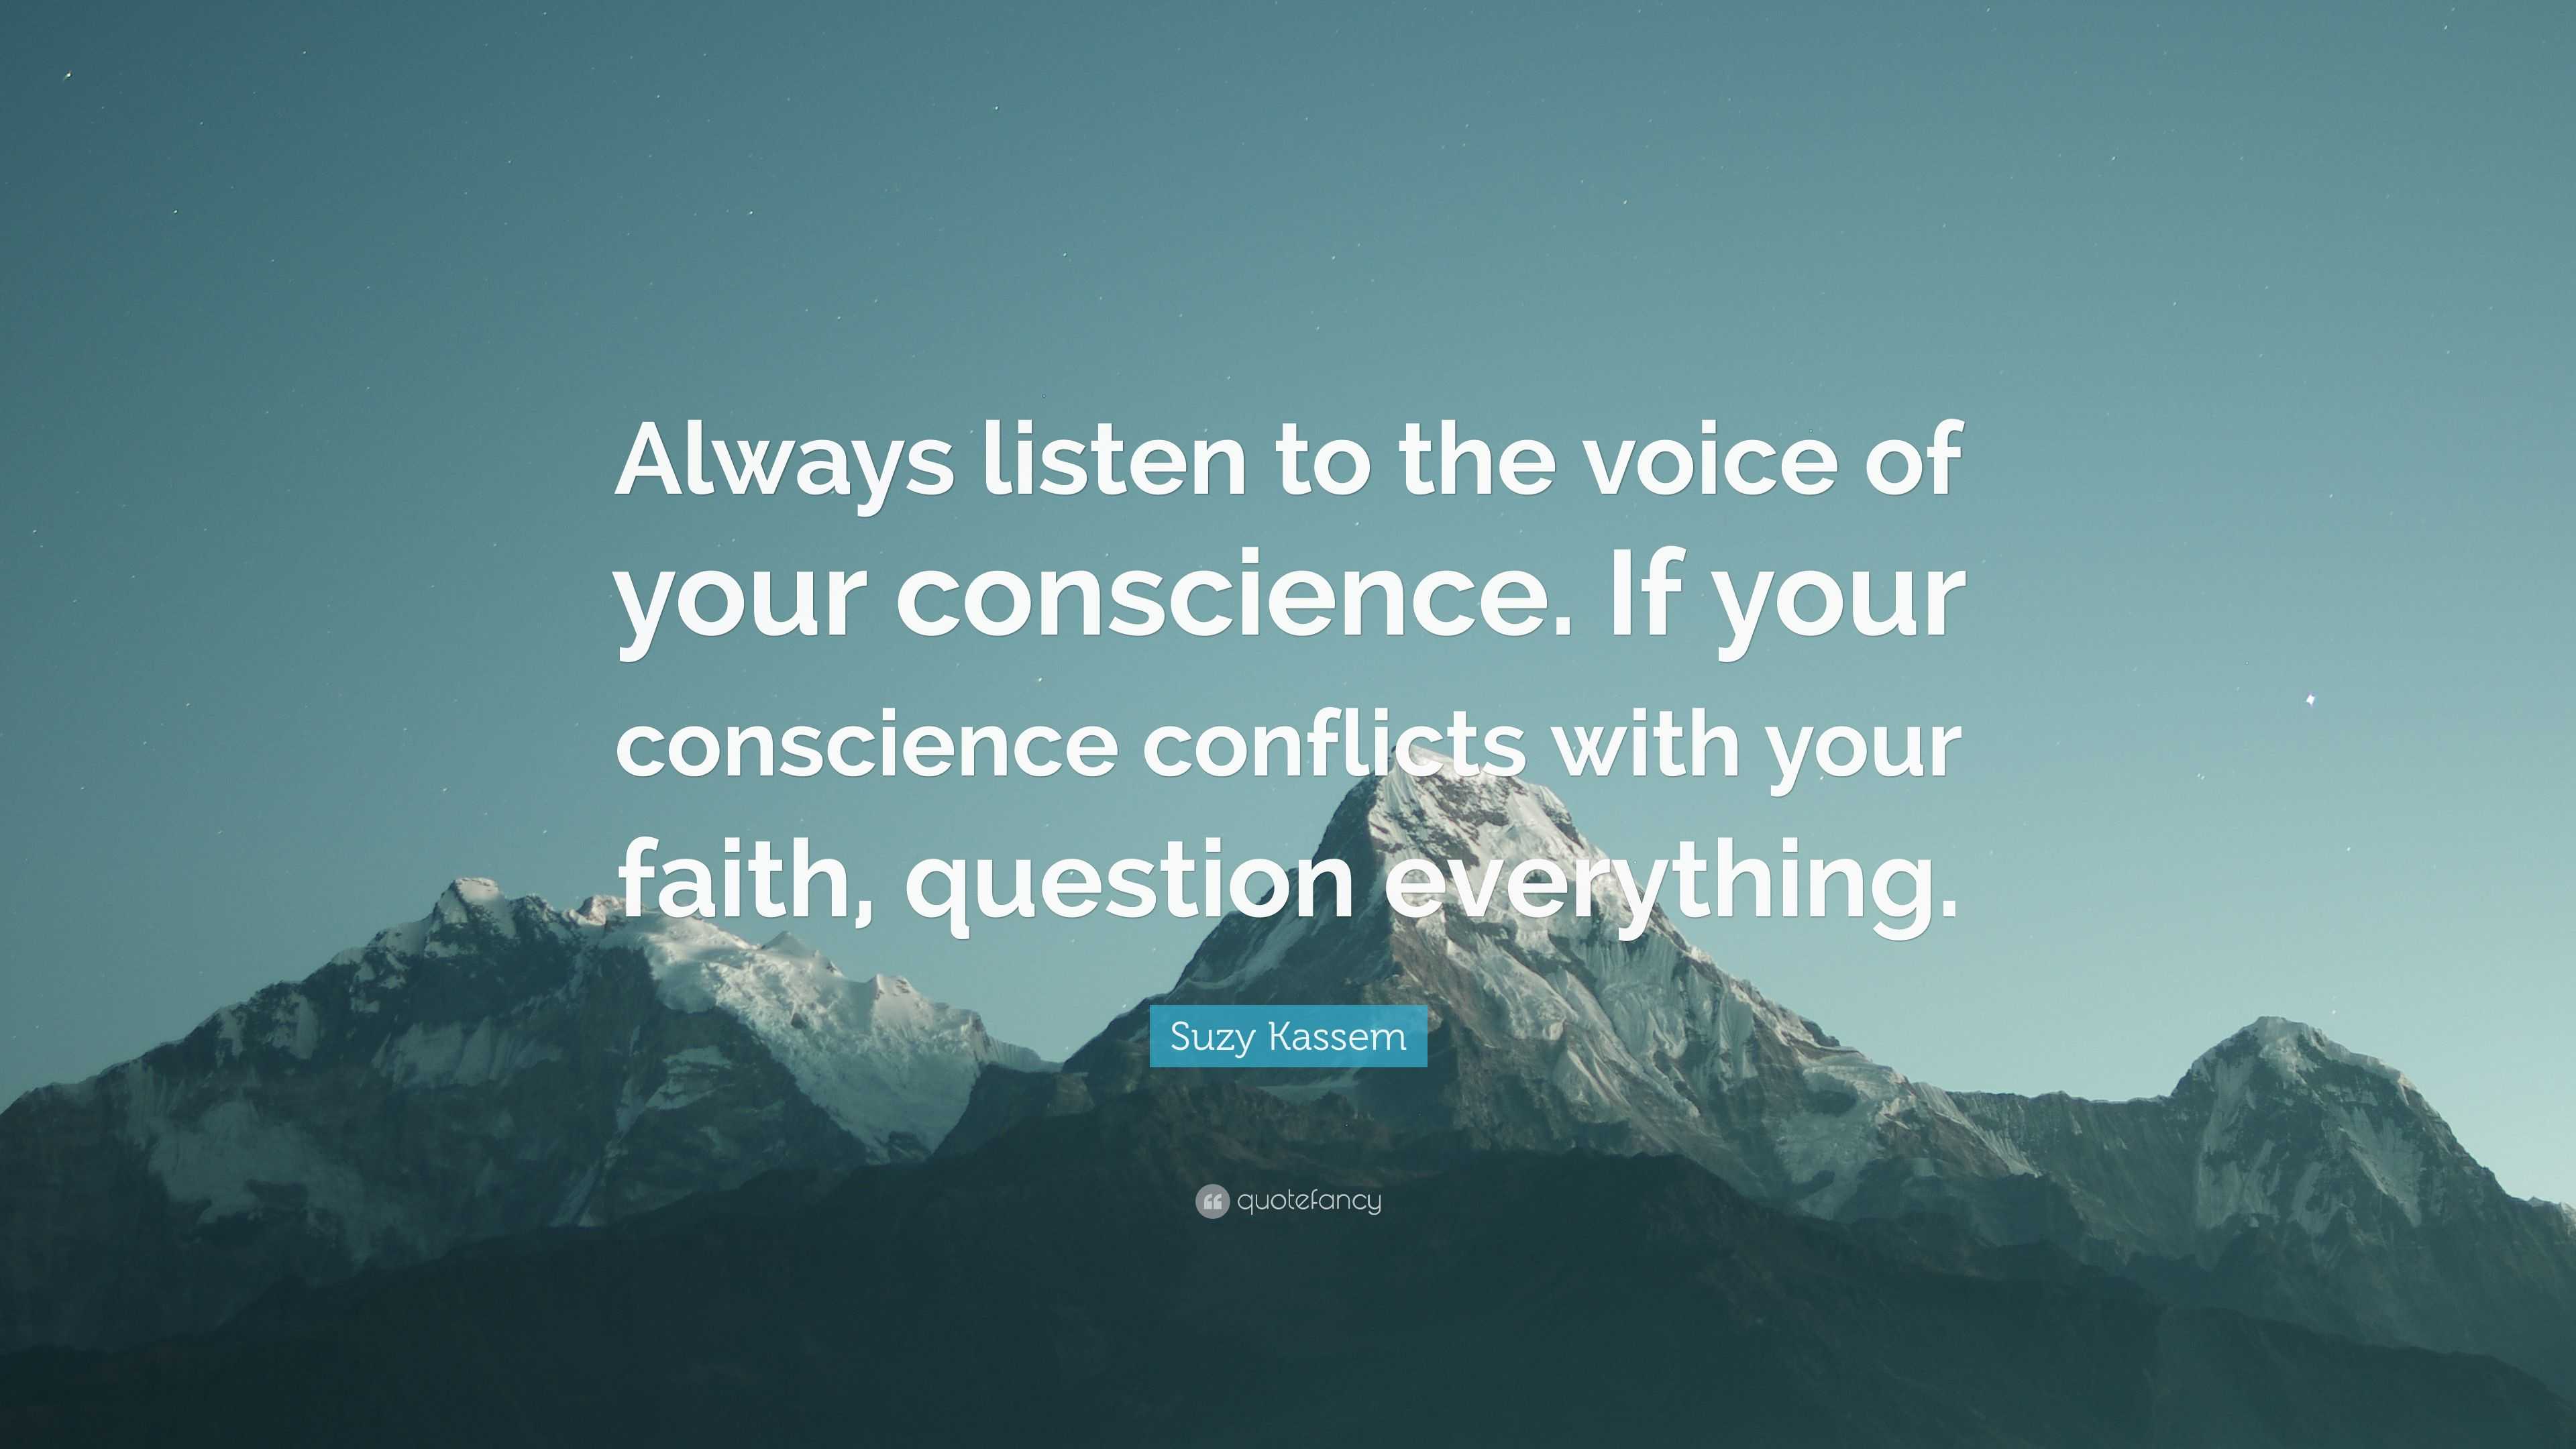 Suzy Kassem Quote: “Always listen to the voice of your conscience. If ...